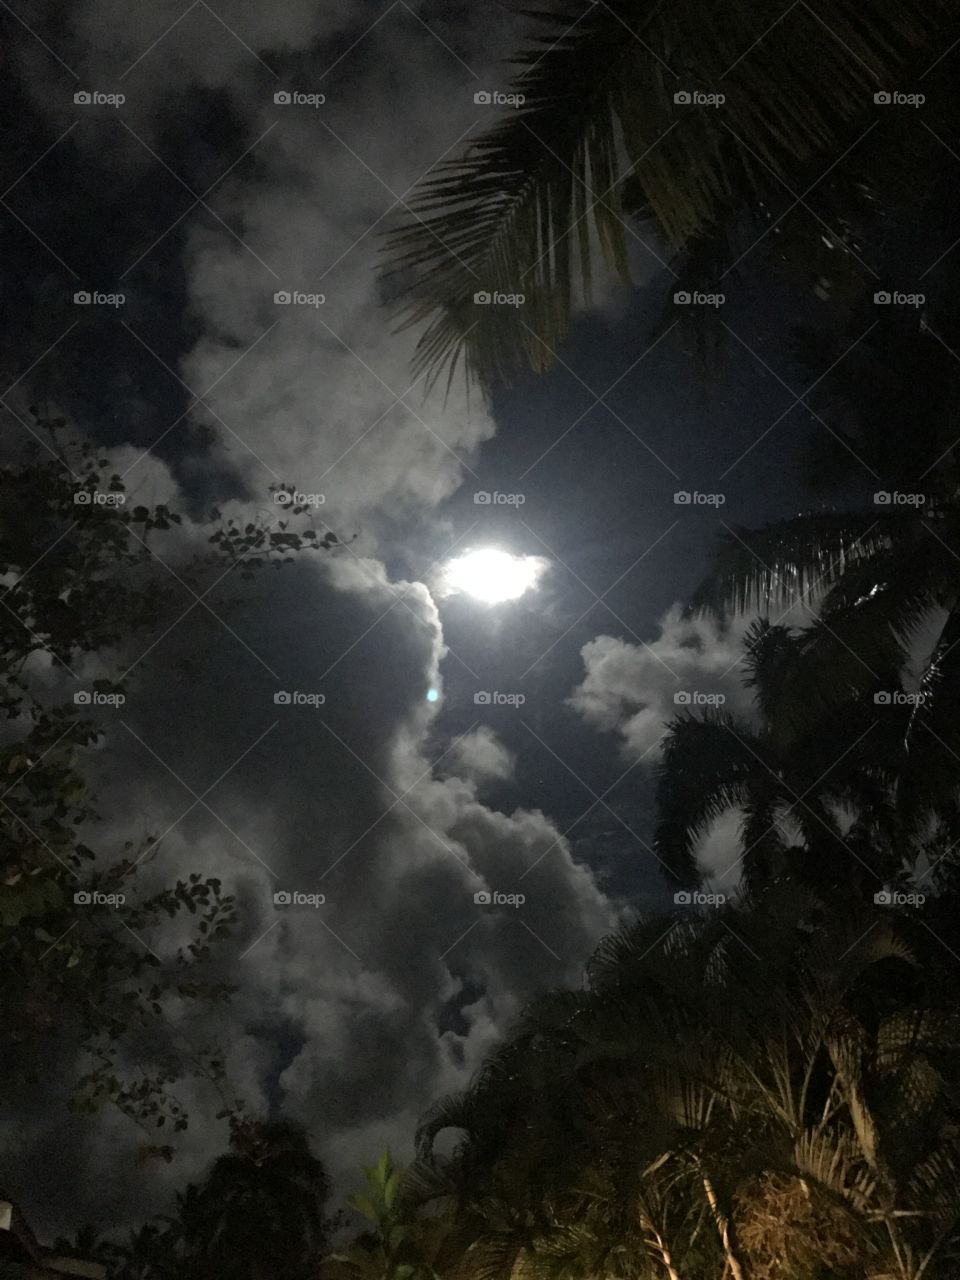 Cloudy night with the moon